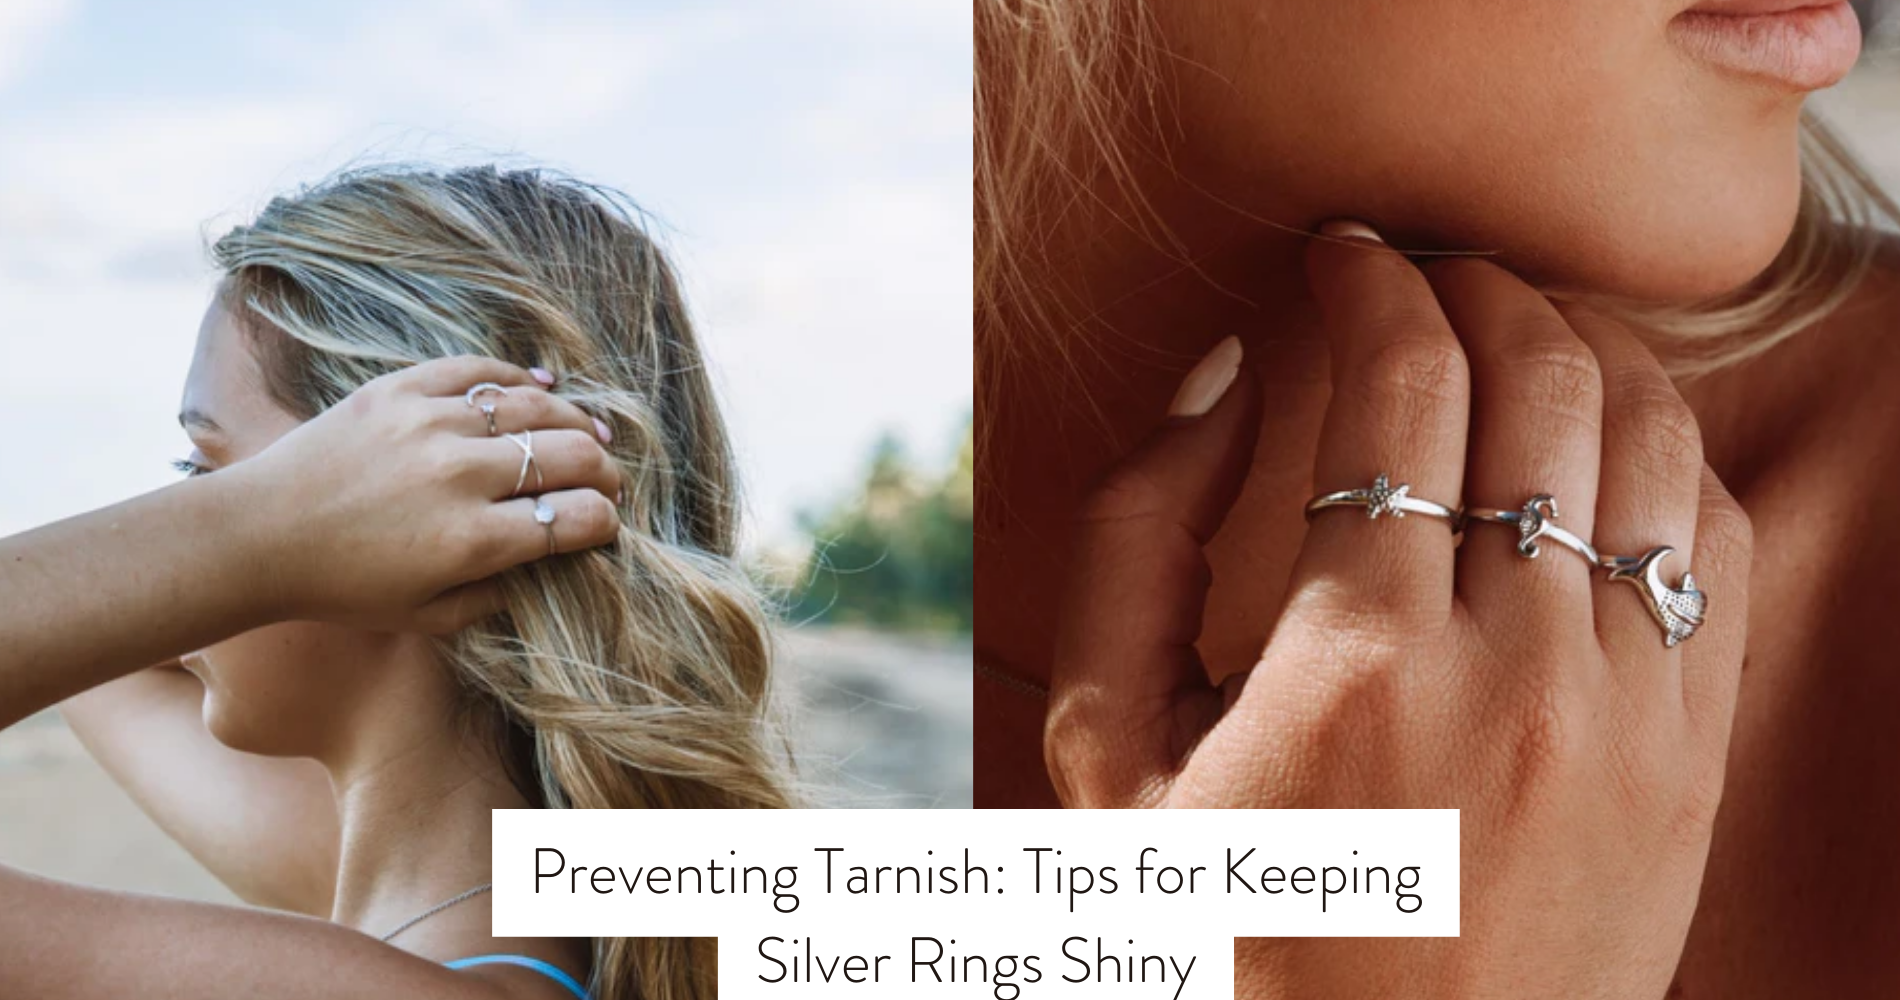 does silver rings tarnish